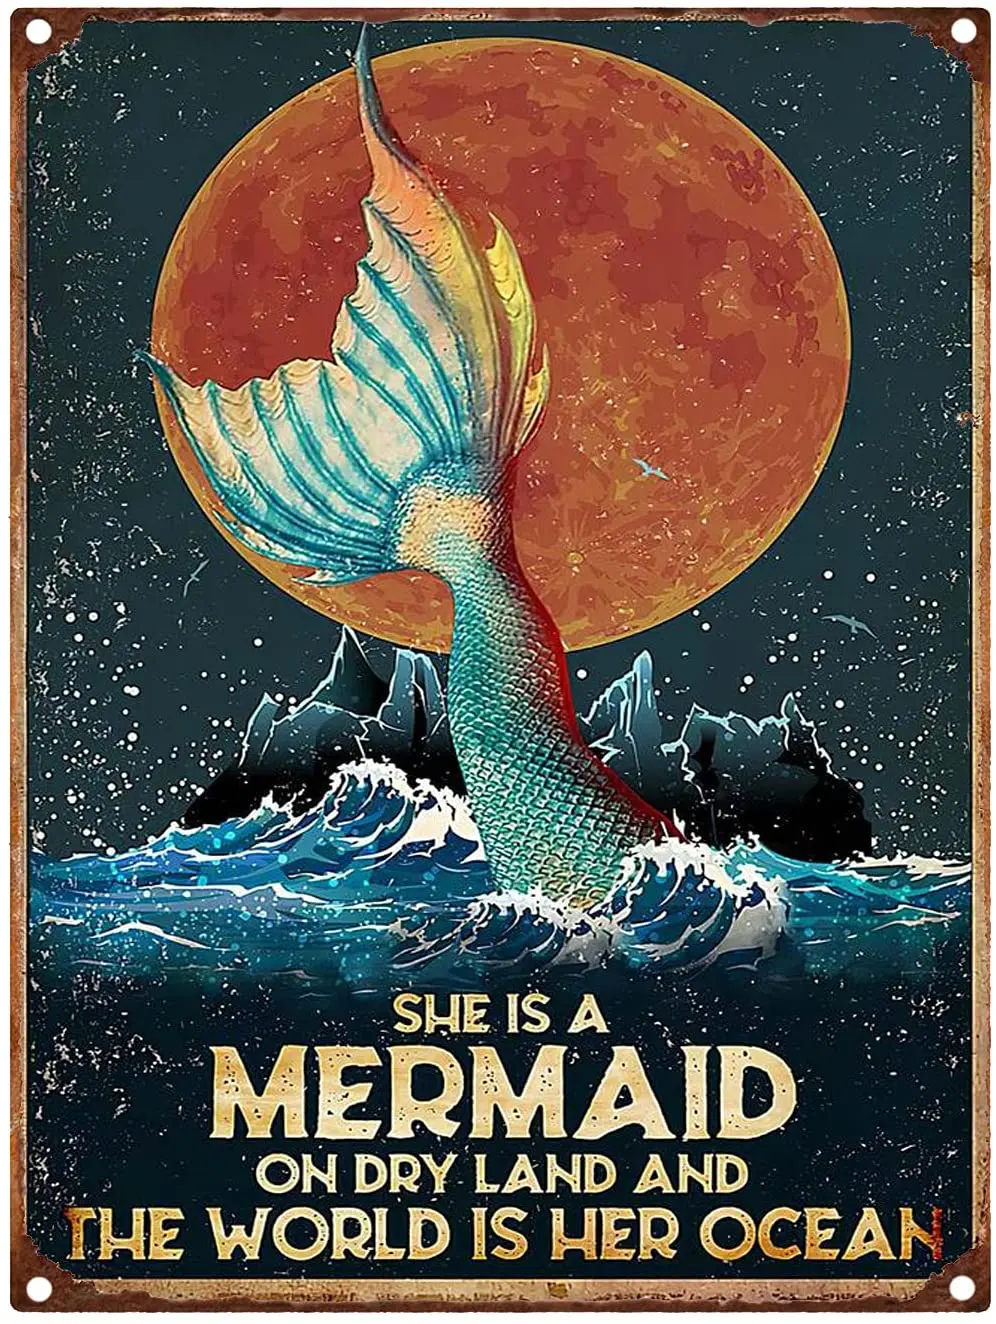 

Vintage Tin Sign Fashion Metal Poster Wall Decoration Club Man Cave Smoke Shop Advertising Plate - Mermaid 8x12Inches